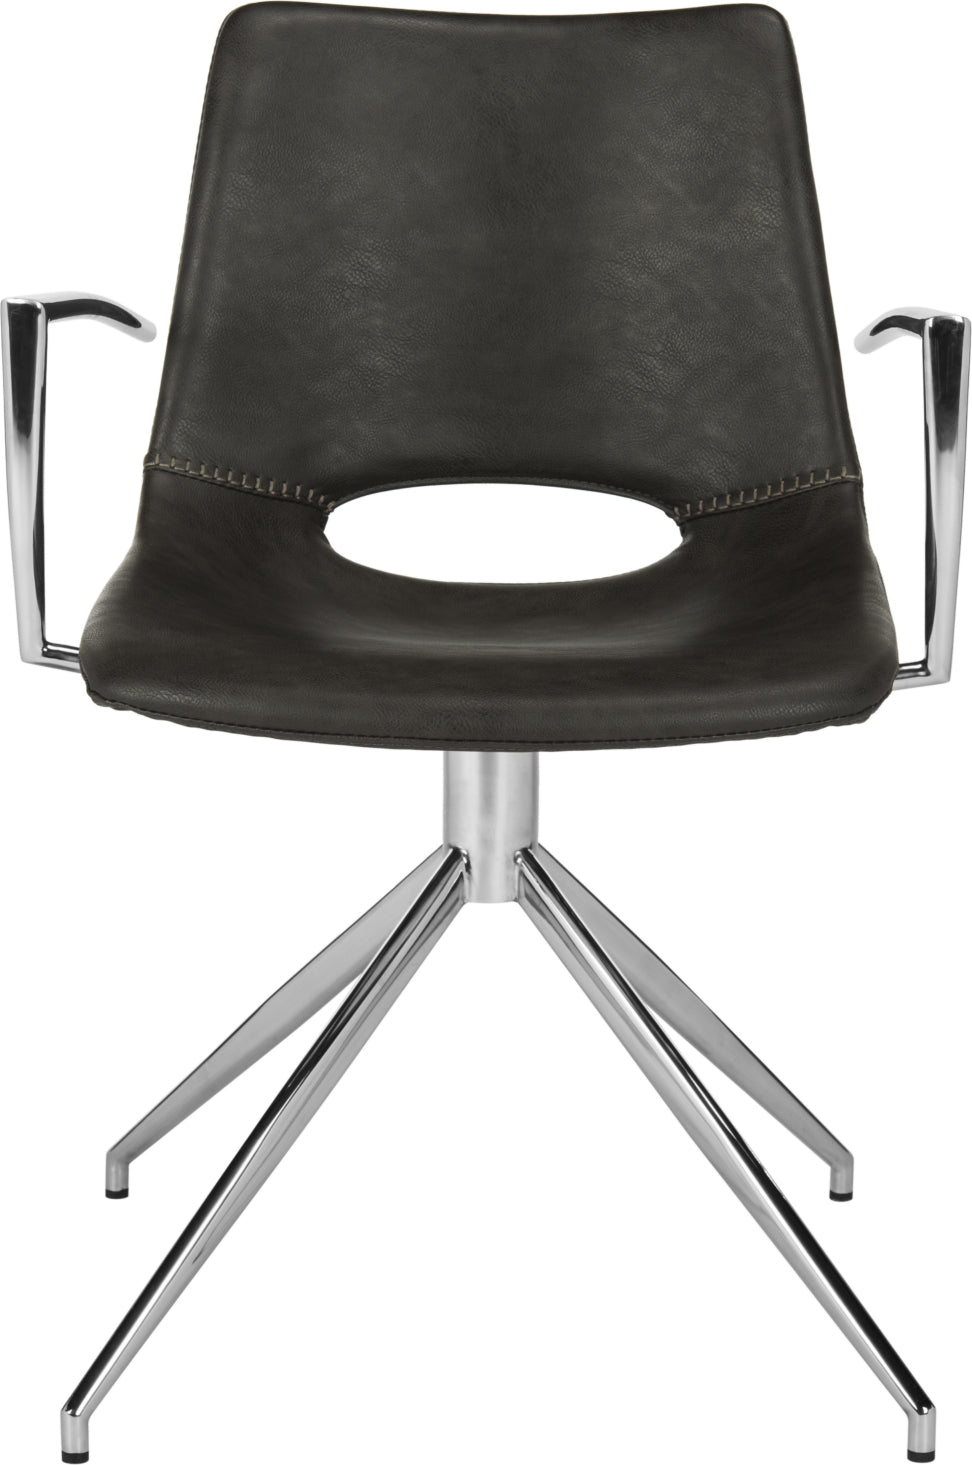 Safavieh Dawn Midcentury Modern Leather Swivel Dining Arm Chair Grey and Silver Furniture main image